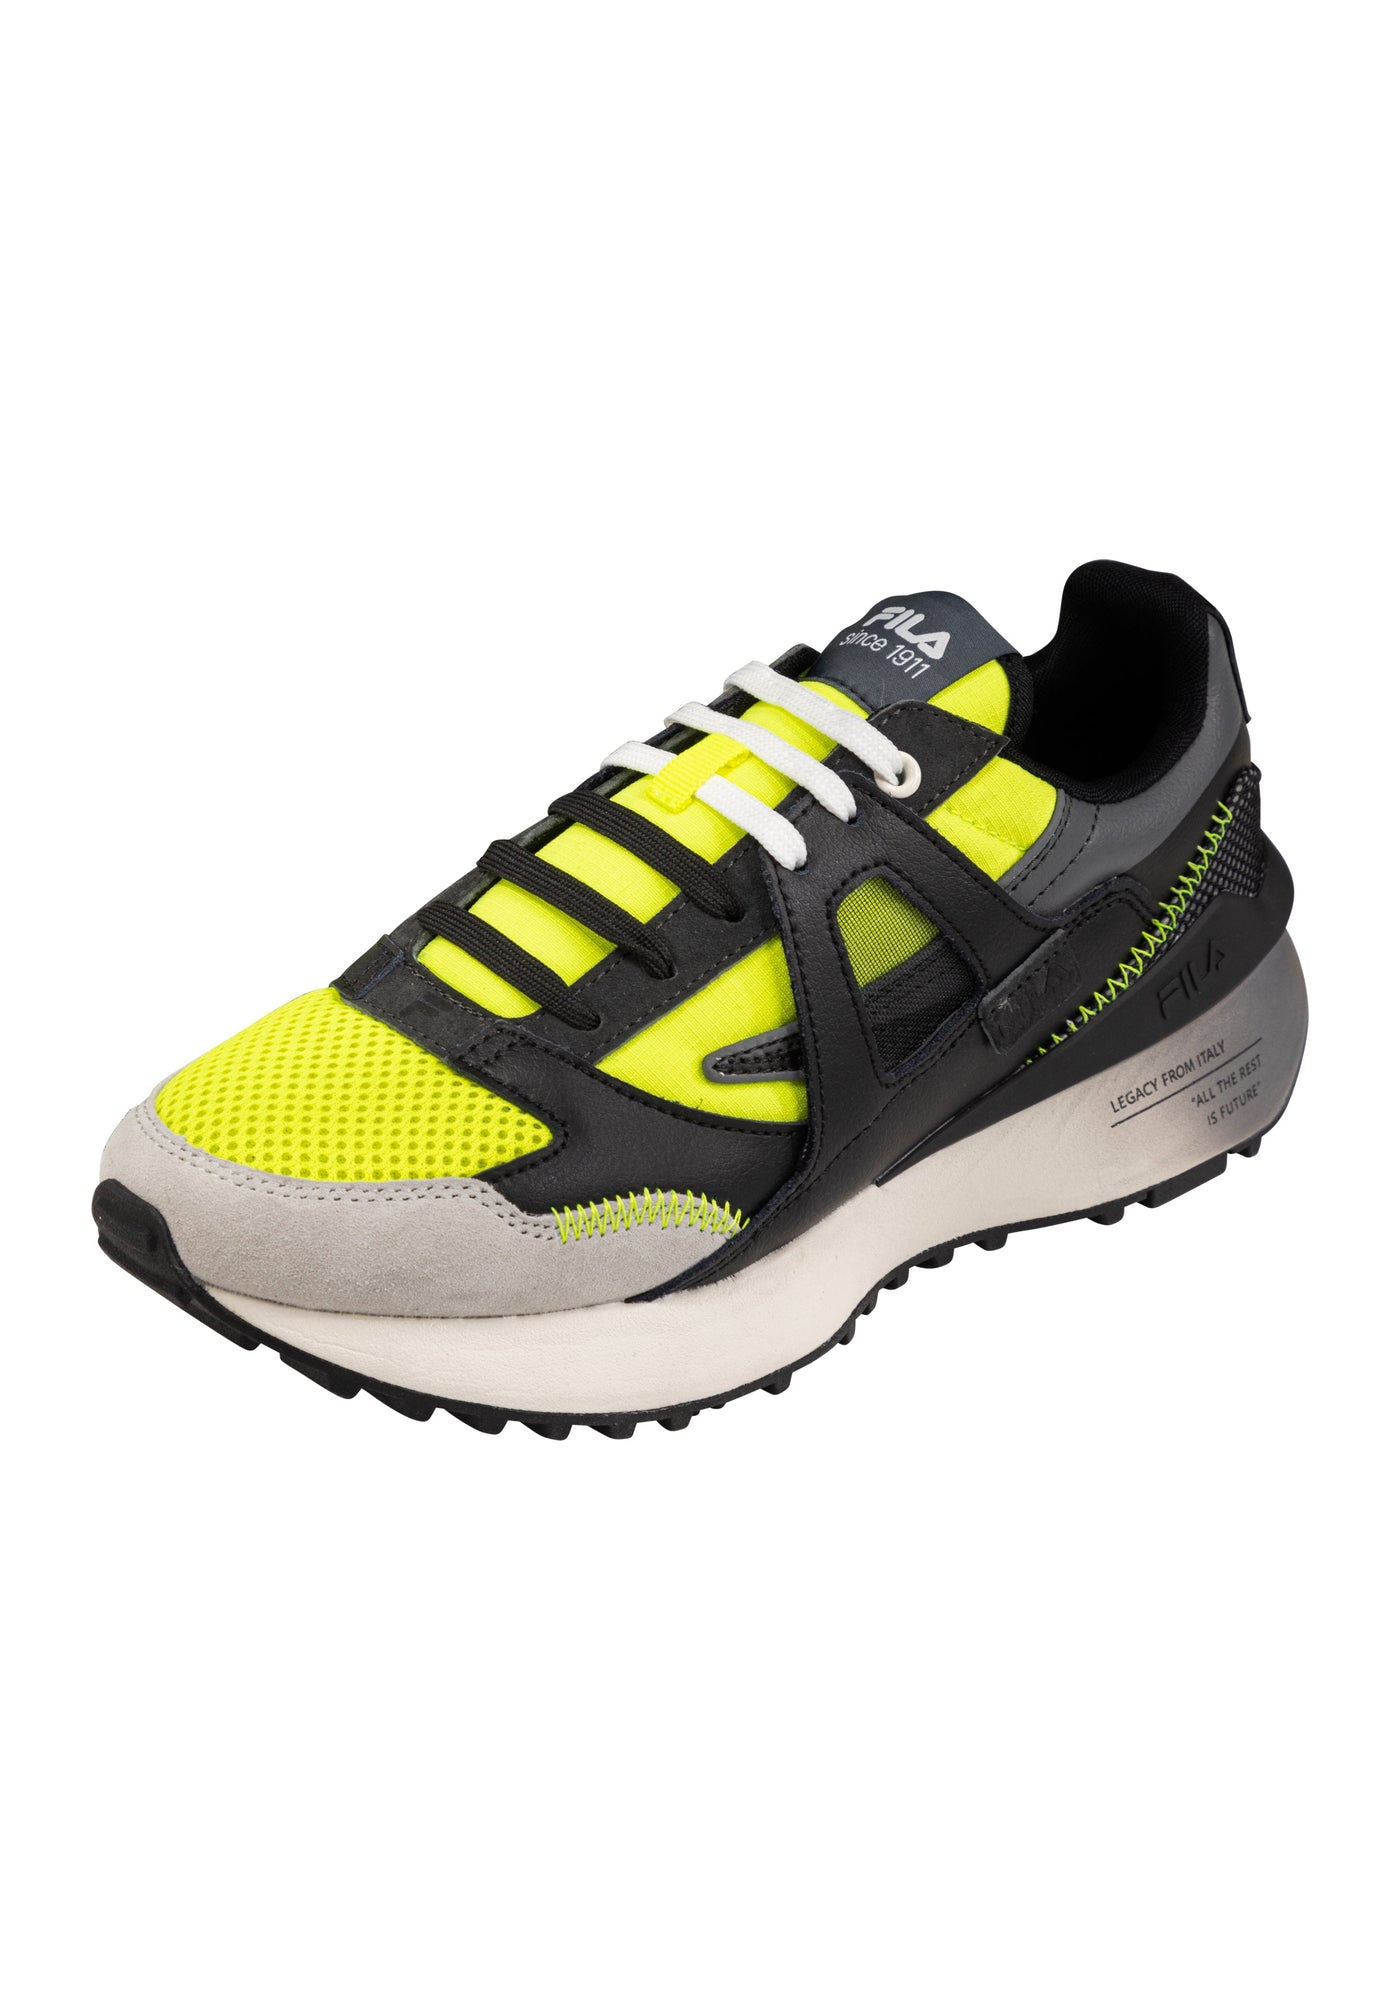 Contempo in Safety Yellow-Black Sneakers Fila   